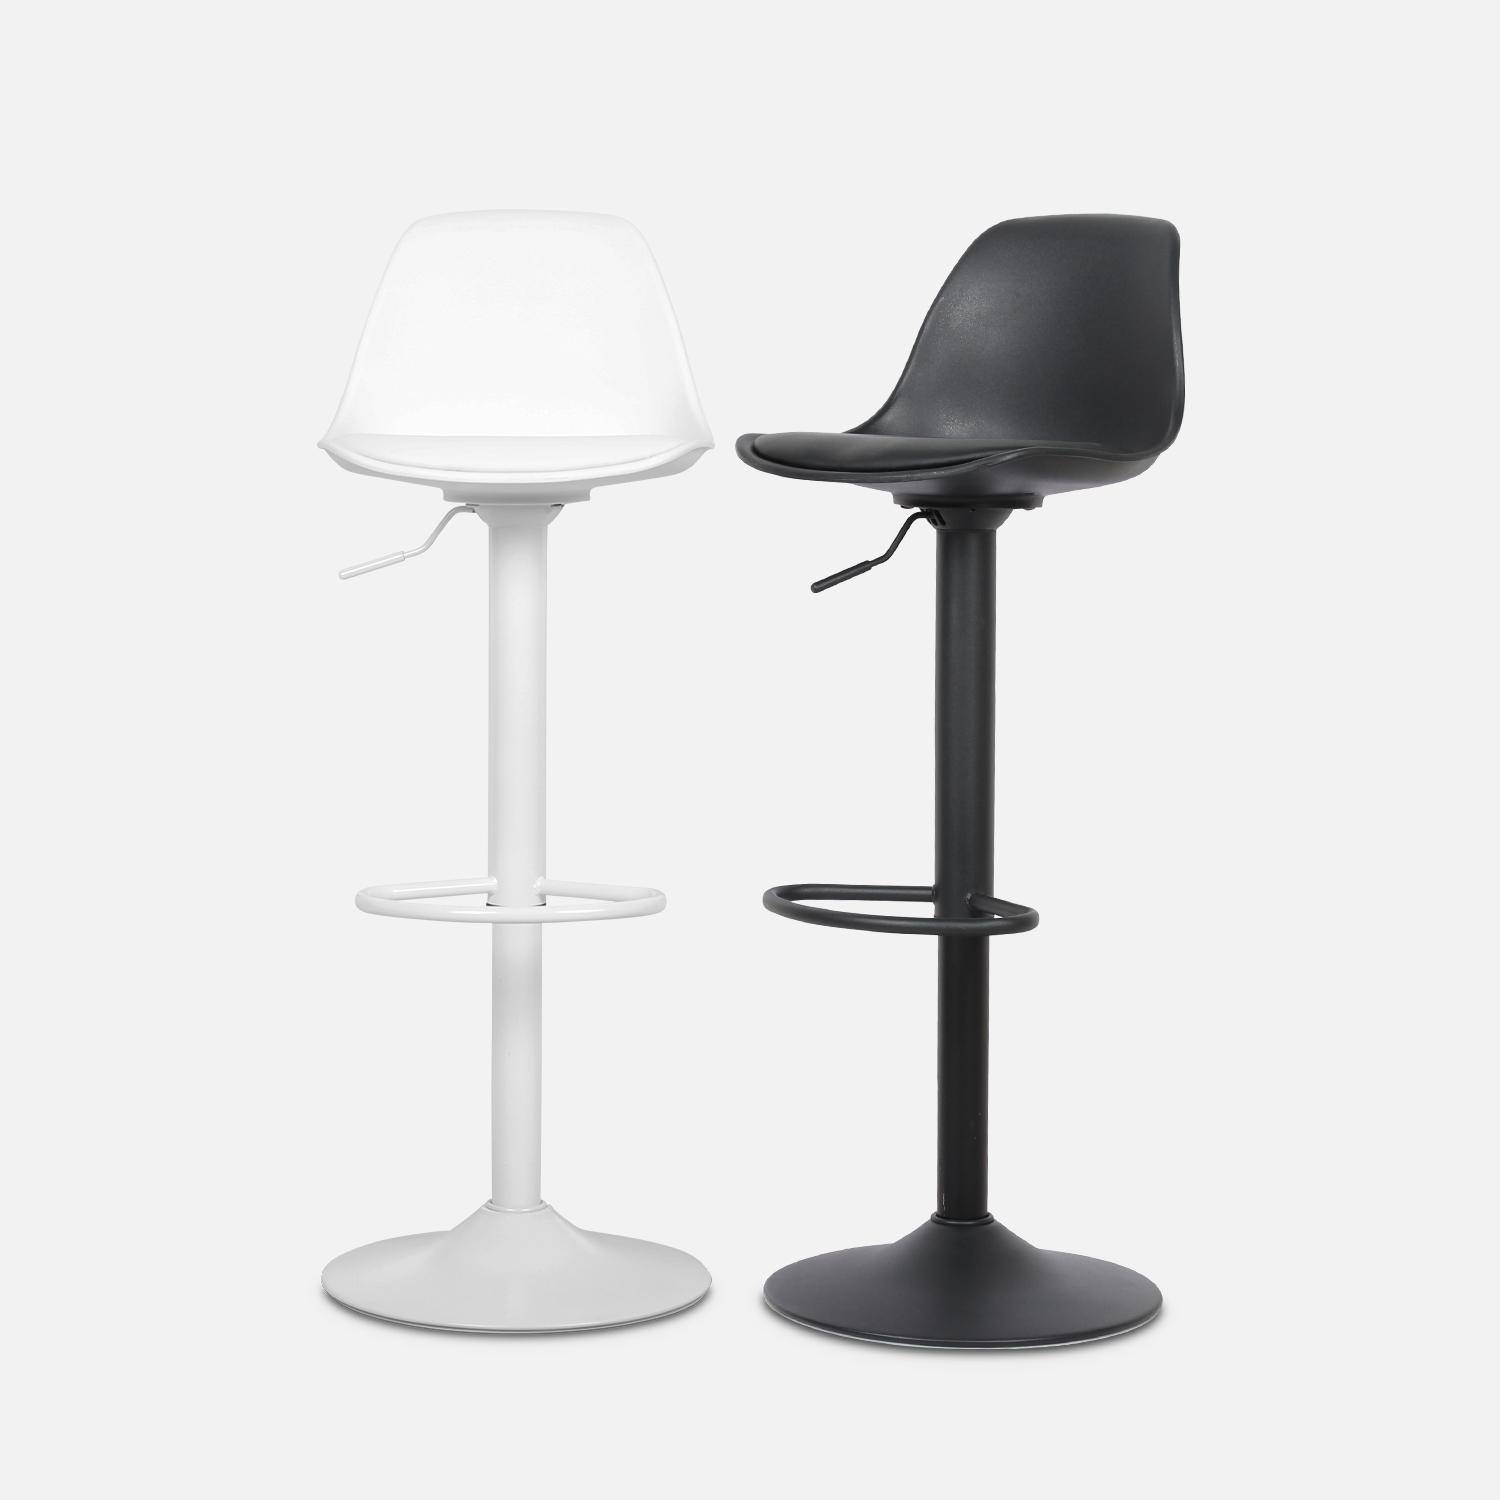 Pair of faux leather, rounded backrest, adjustable bar stools, seat height 61.5 - 83.5cm - Noah - Black,sweeek,Photo8